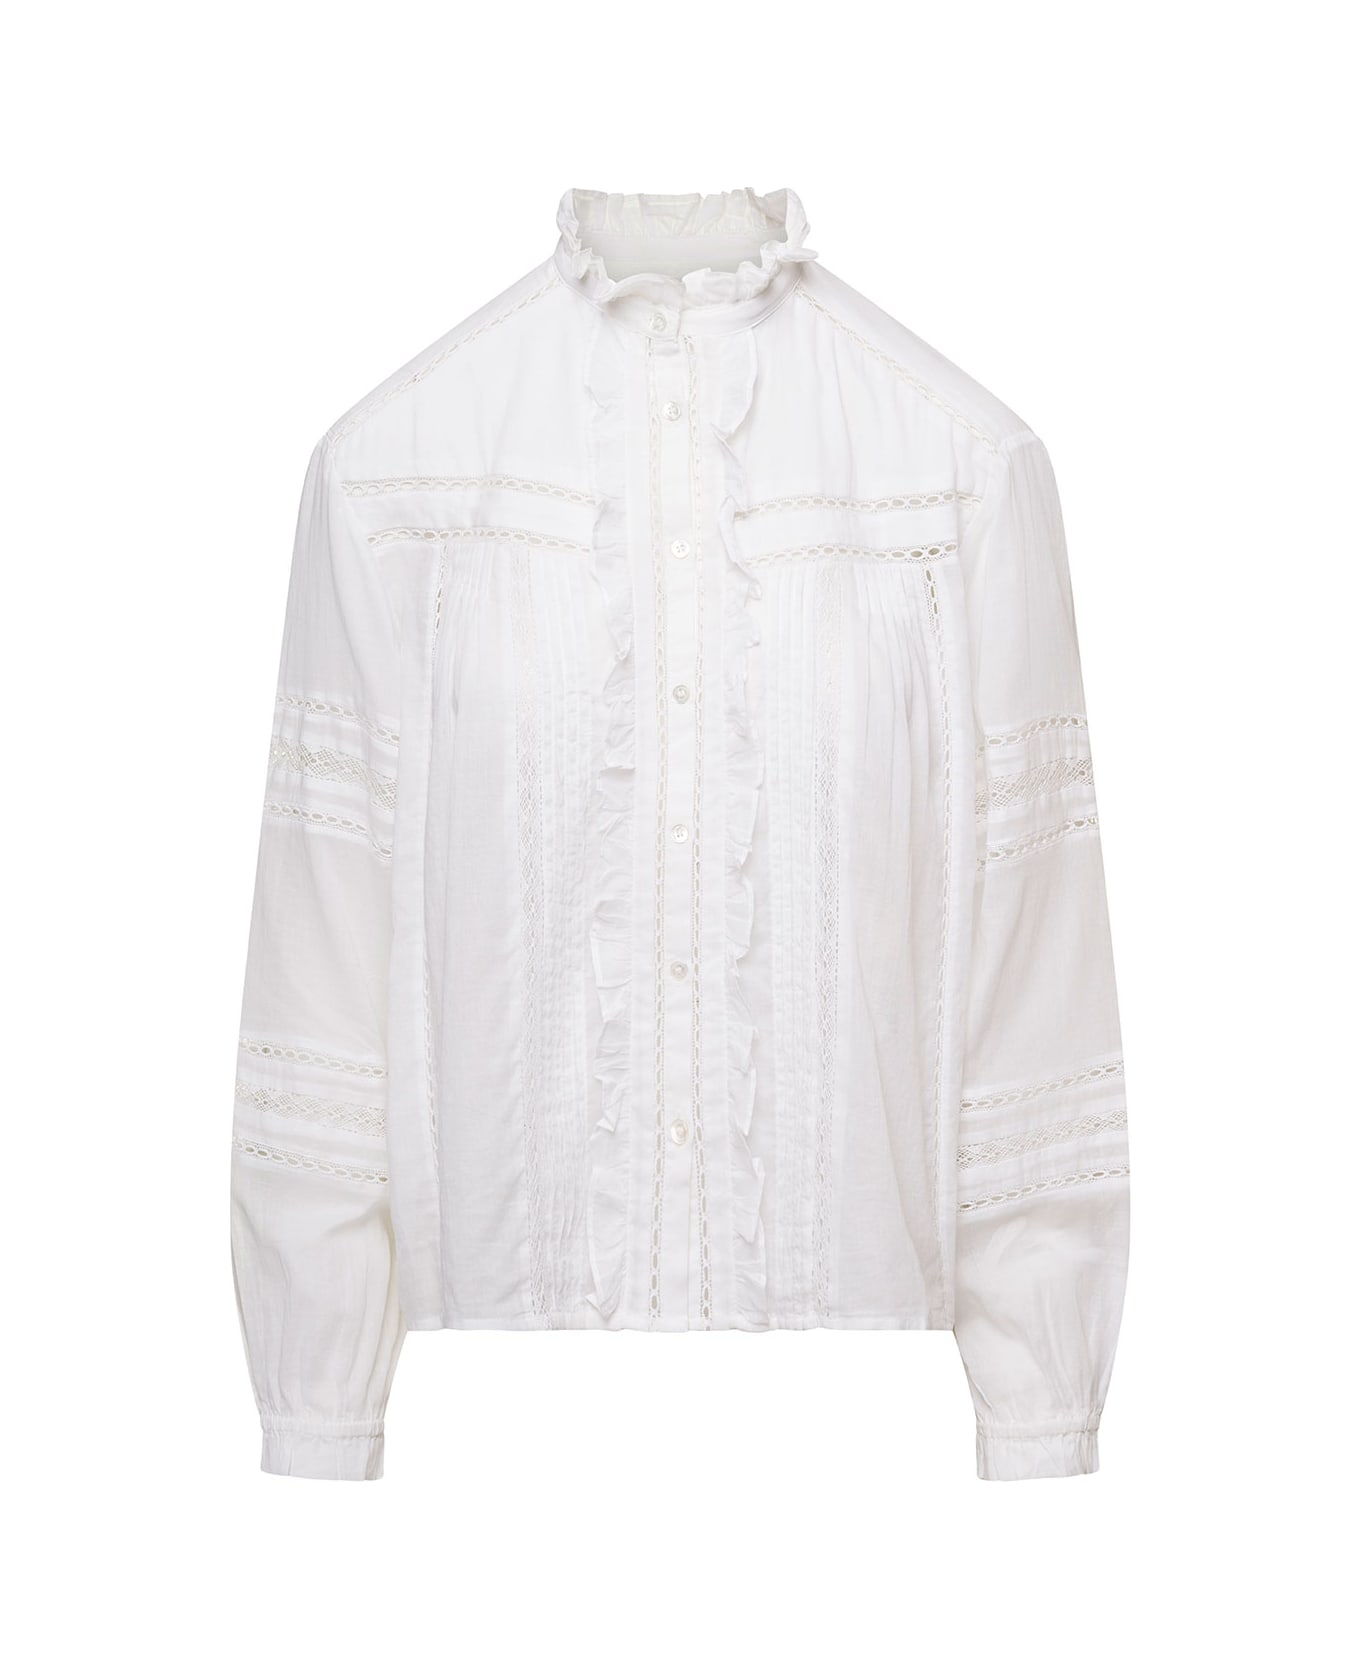 Isabel Marant Étoile White Semi-sheer Shirt With Mock Neck In Cotton Woman - White